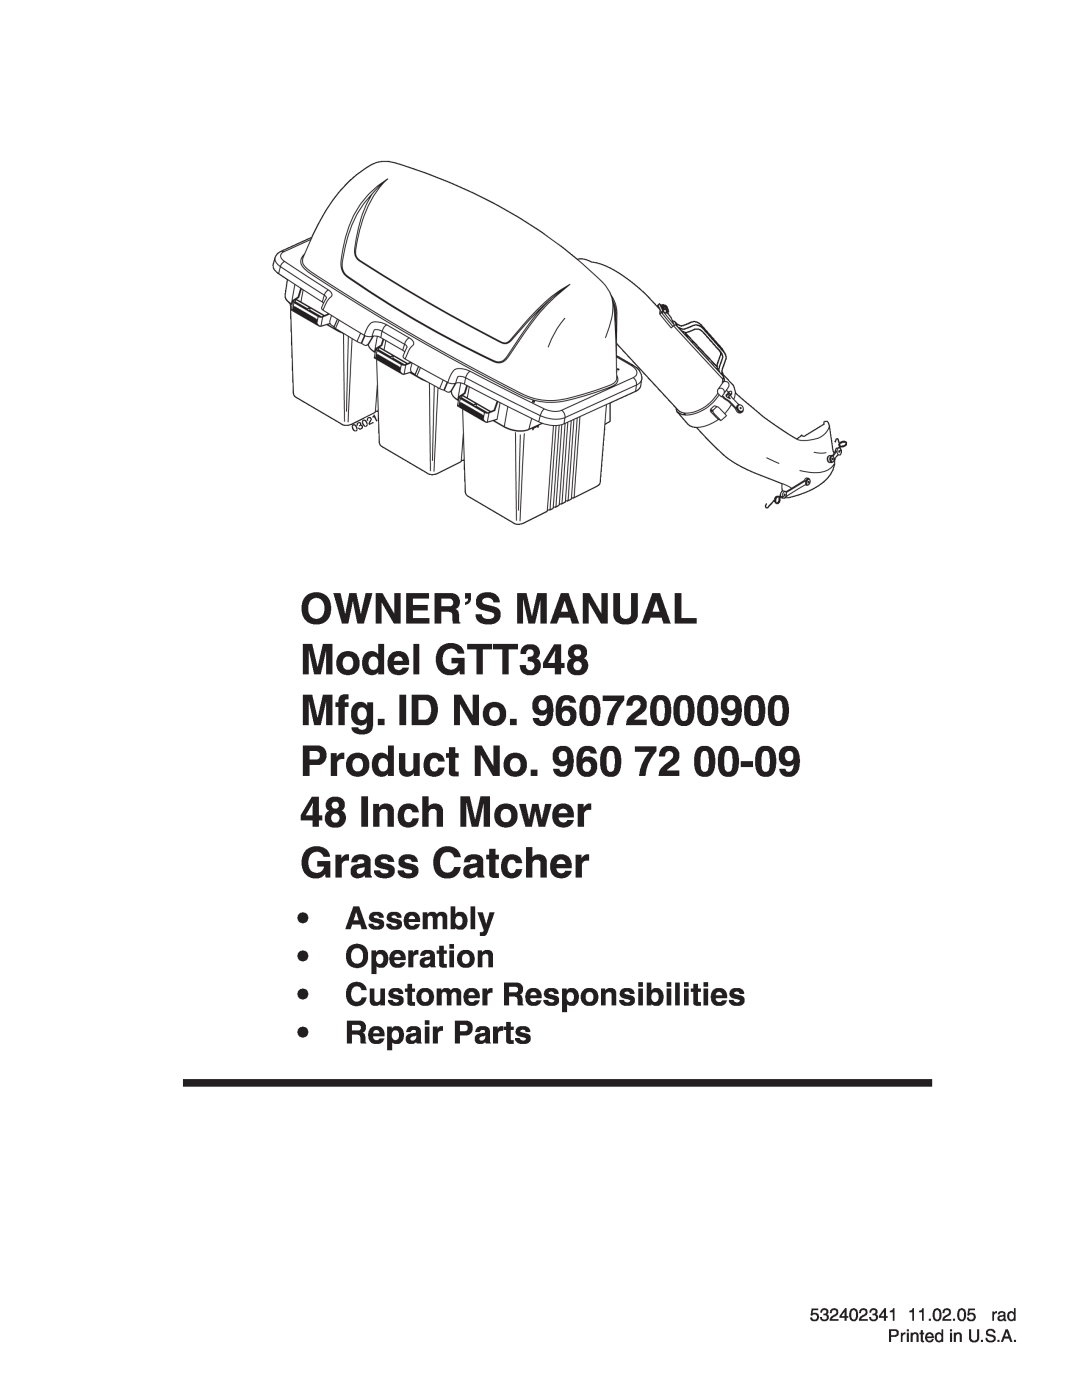 Poulan 532402341 owner manual Product No. 960 72 48 Inch Mower Grass Catcher, Assembly Operation Customer Responsibilities 